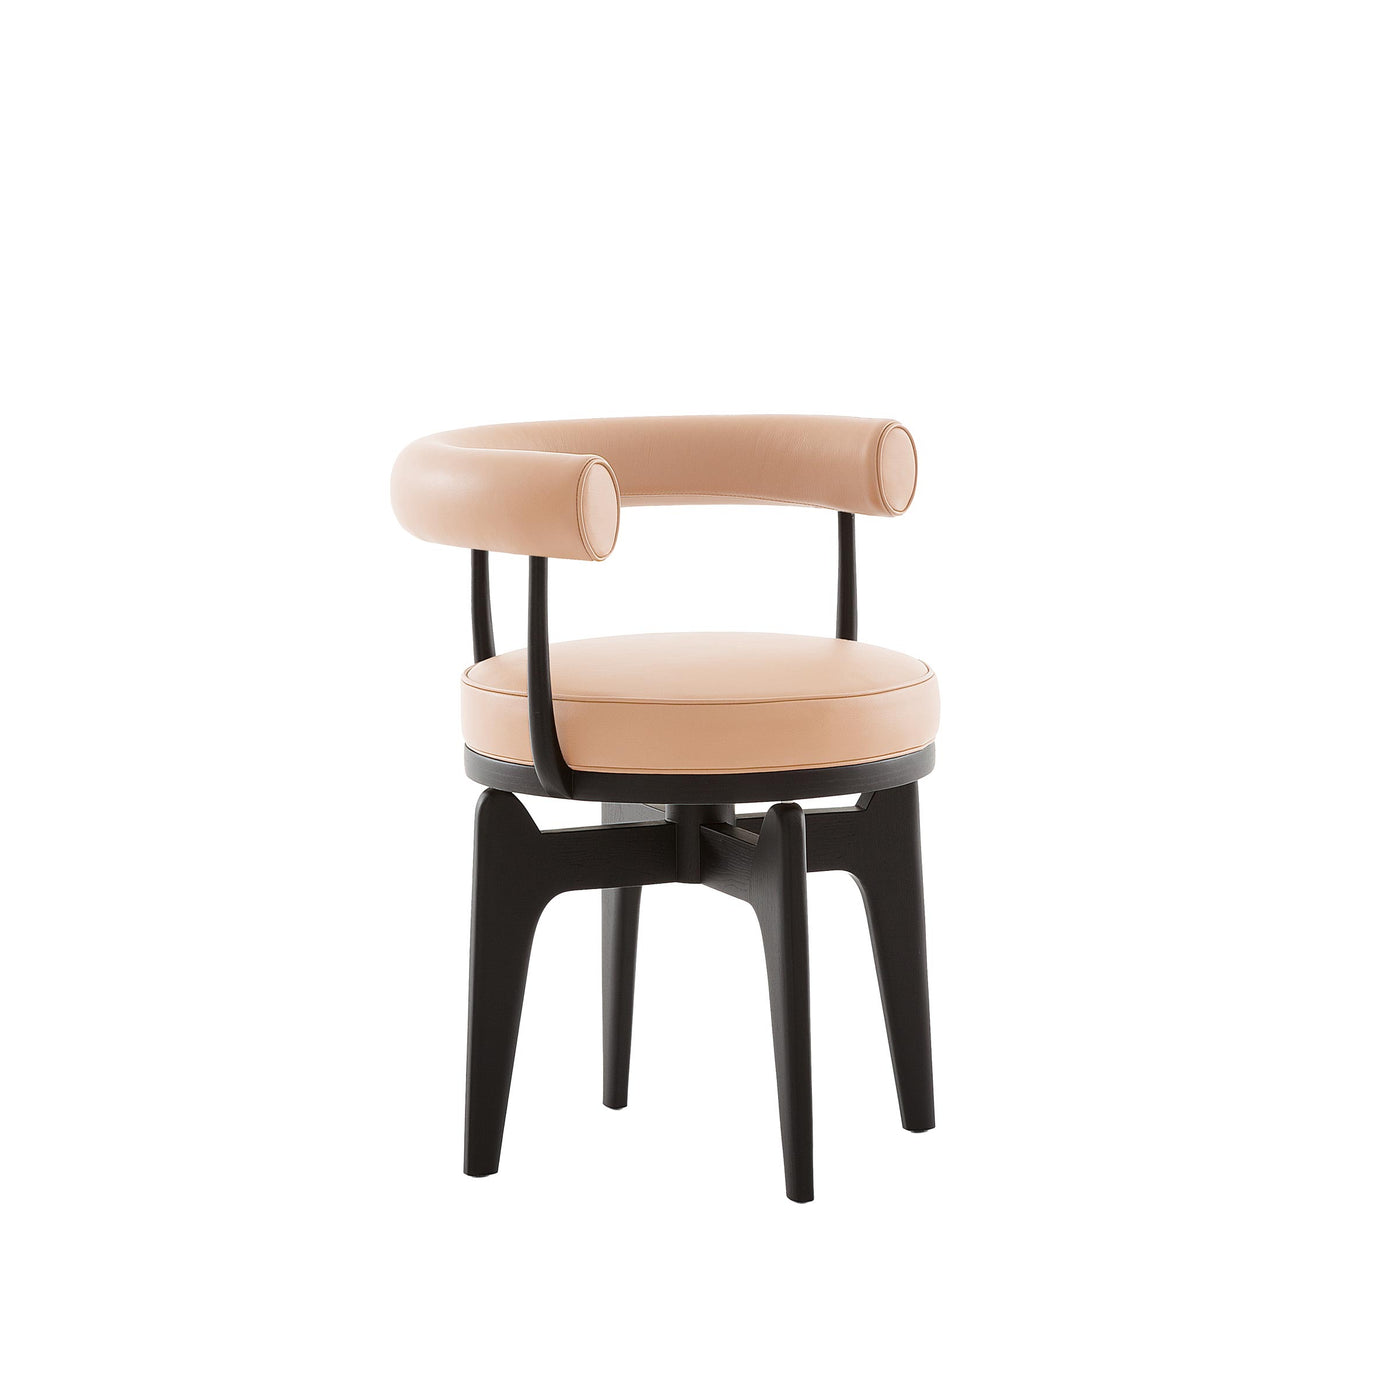 Wood and Leather Swivel Chair INDOCHINE by Charlotte Perriand for Cassina 01